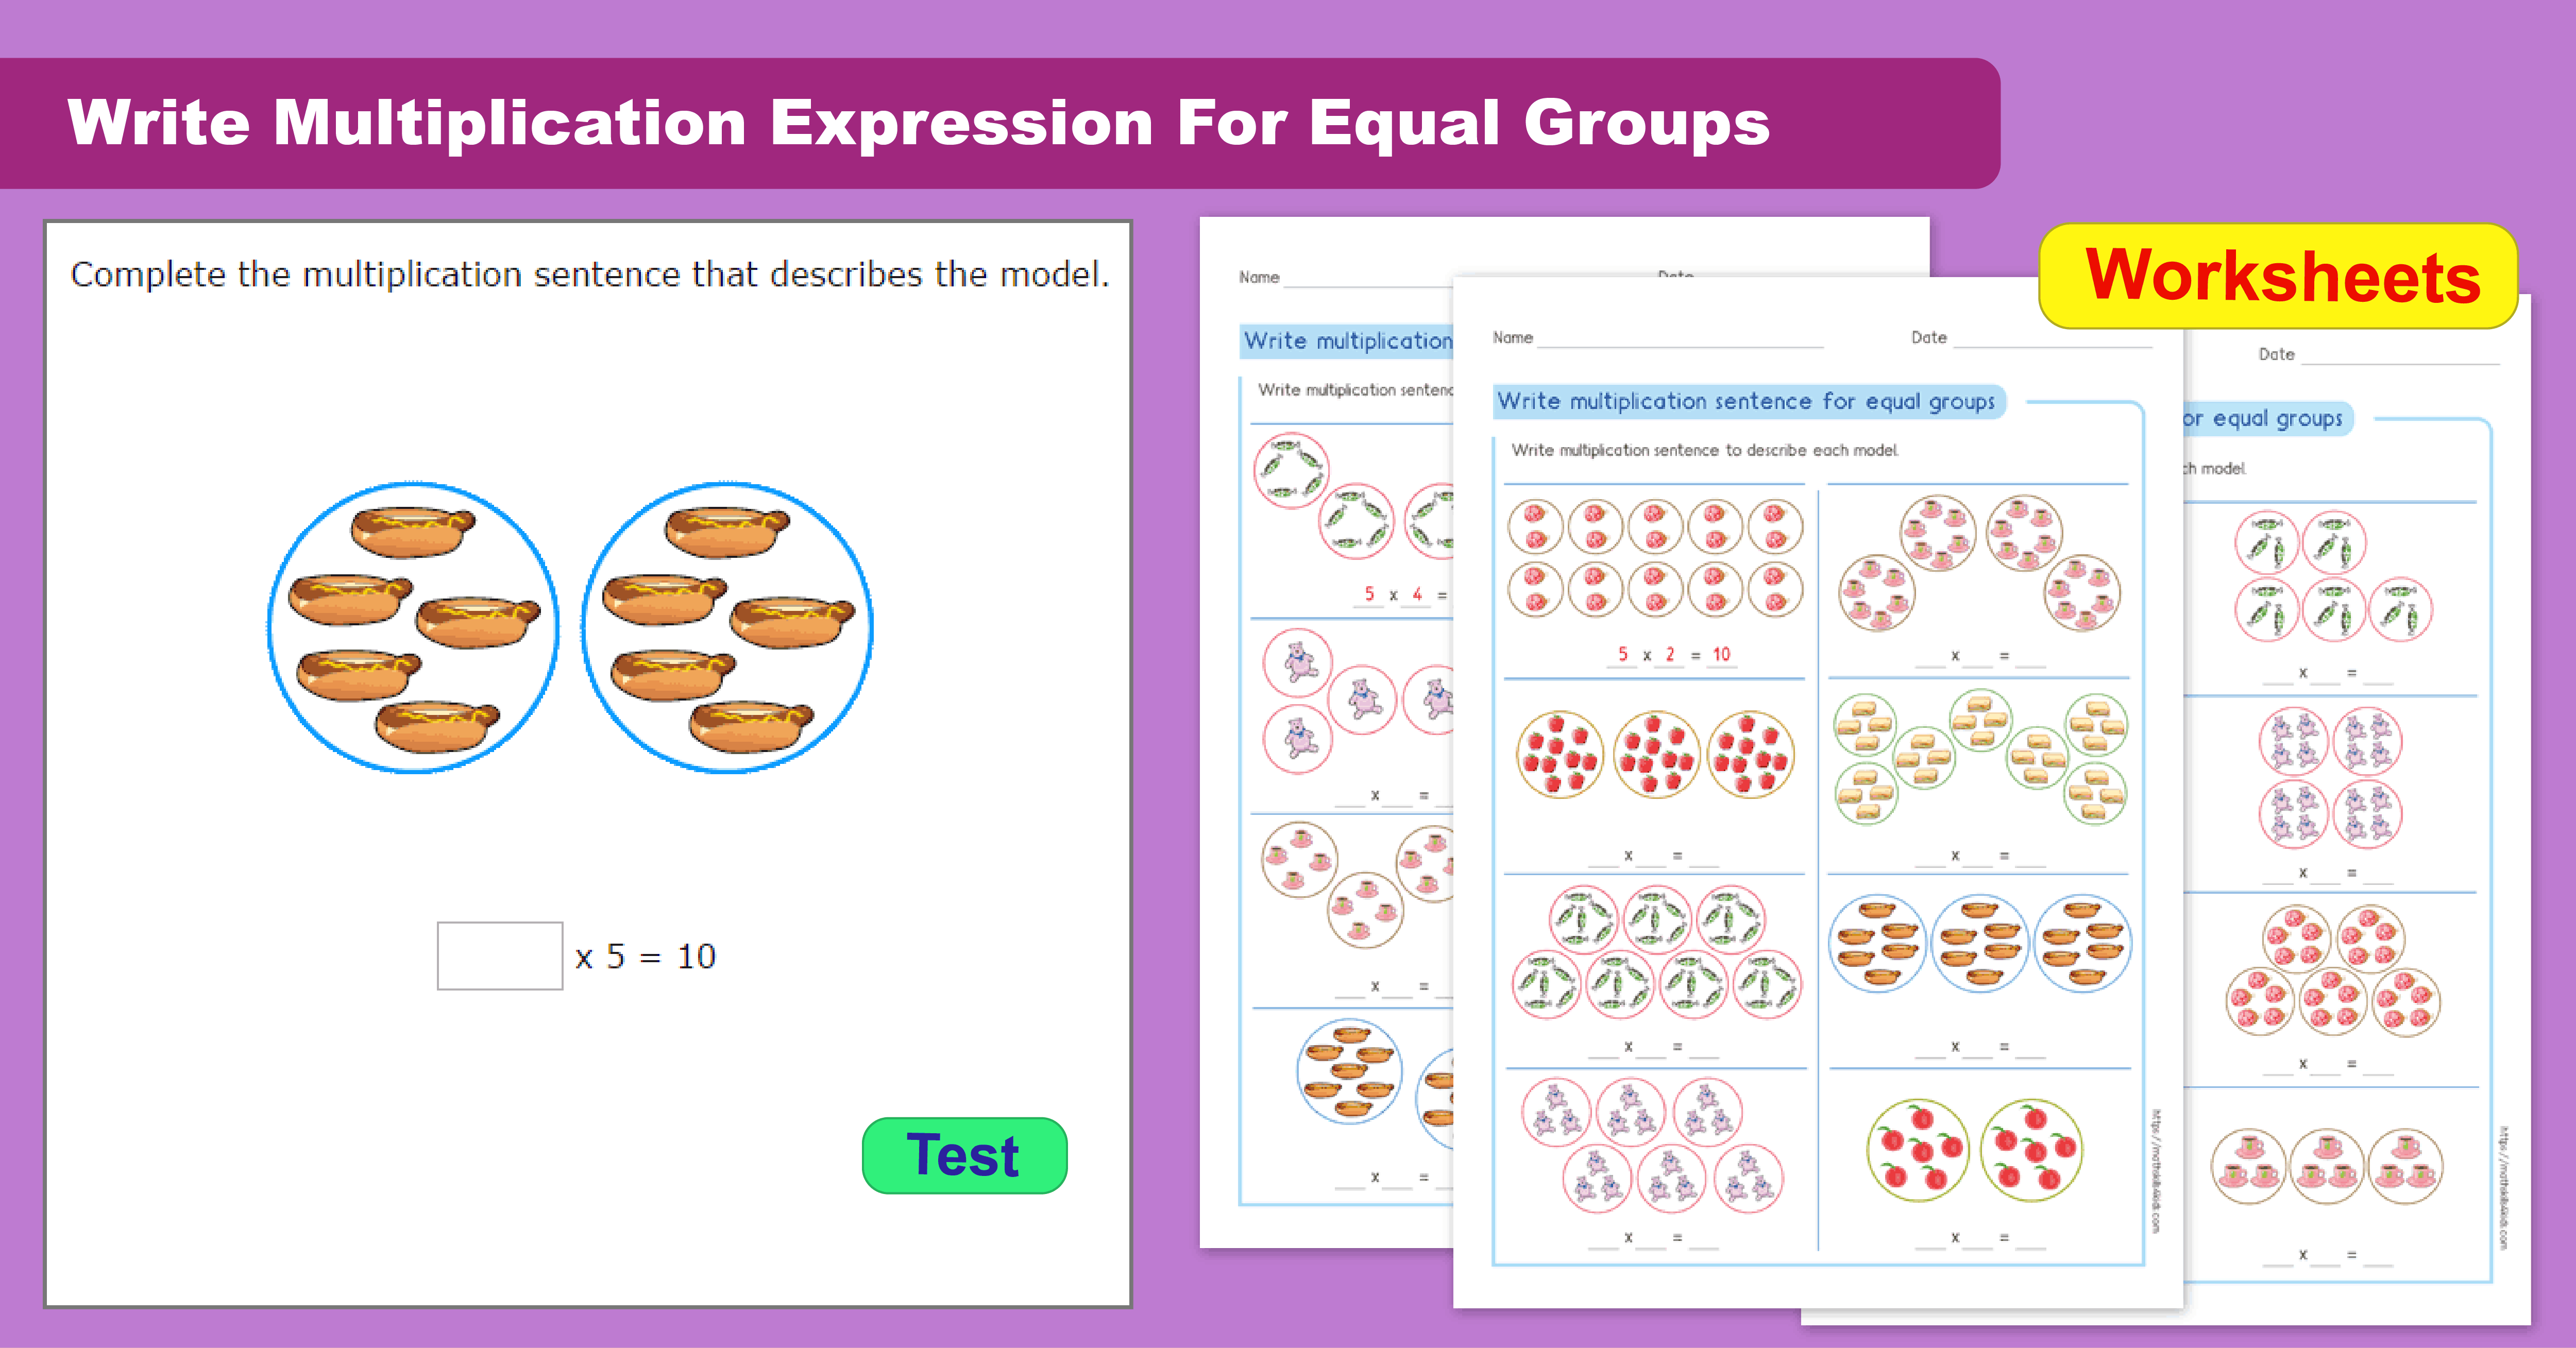 Write multiplication expression for equal groups | Understand